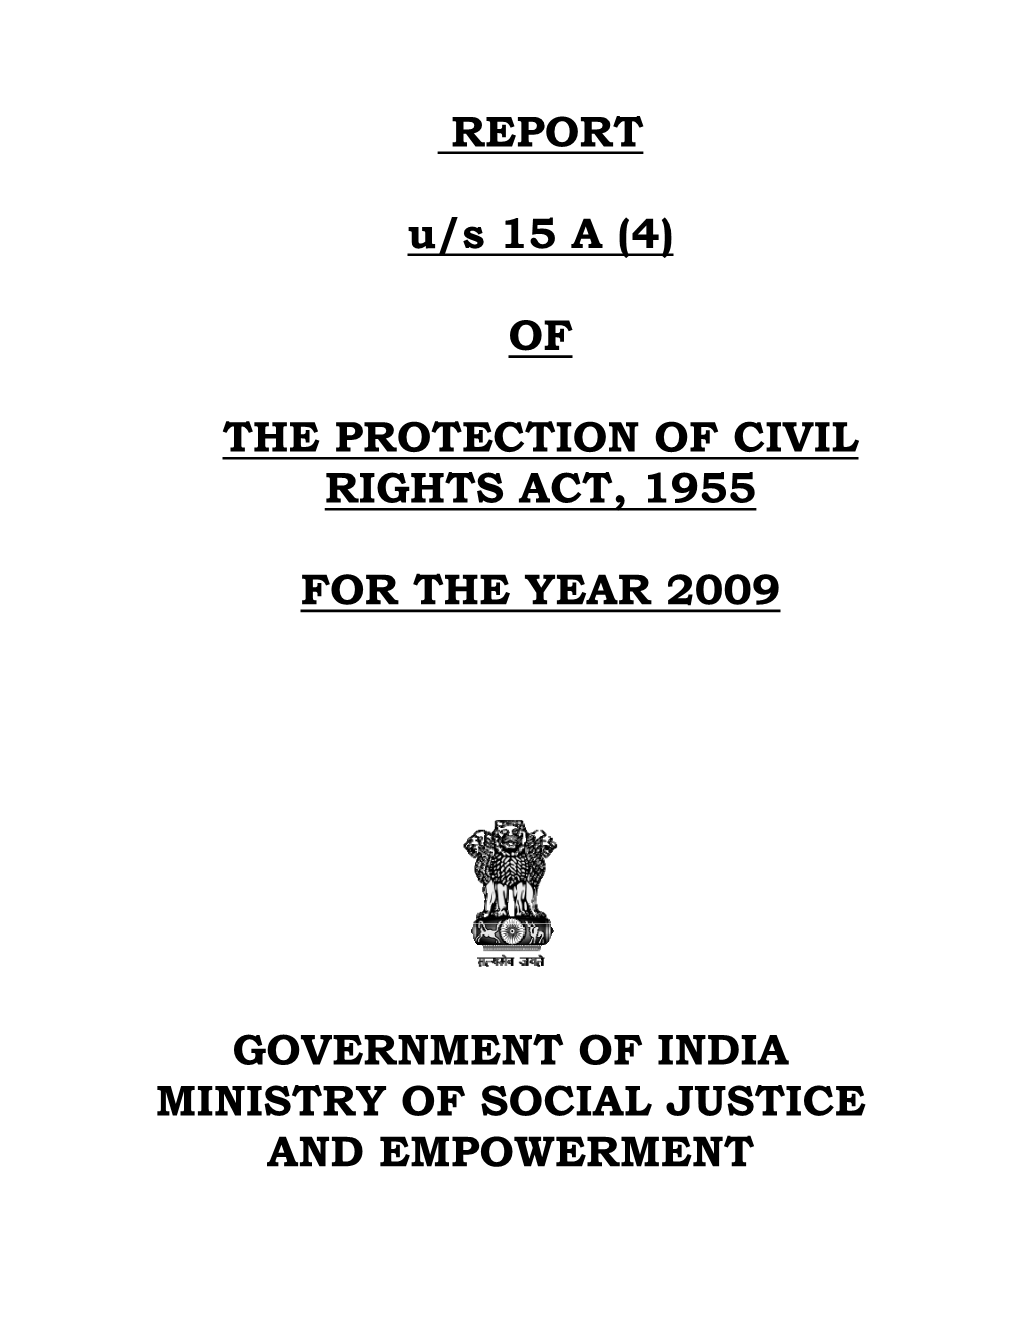 REPORT U/S 15 a (4) of the PROTECTION of CIVIL RIGHTS ACT, 1955 for the YEAR 2009 GOVERNMENT of INDIA MINISTRY of SOCIAL JUSTI